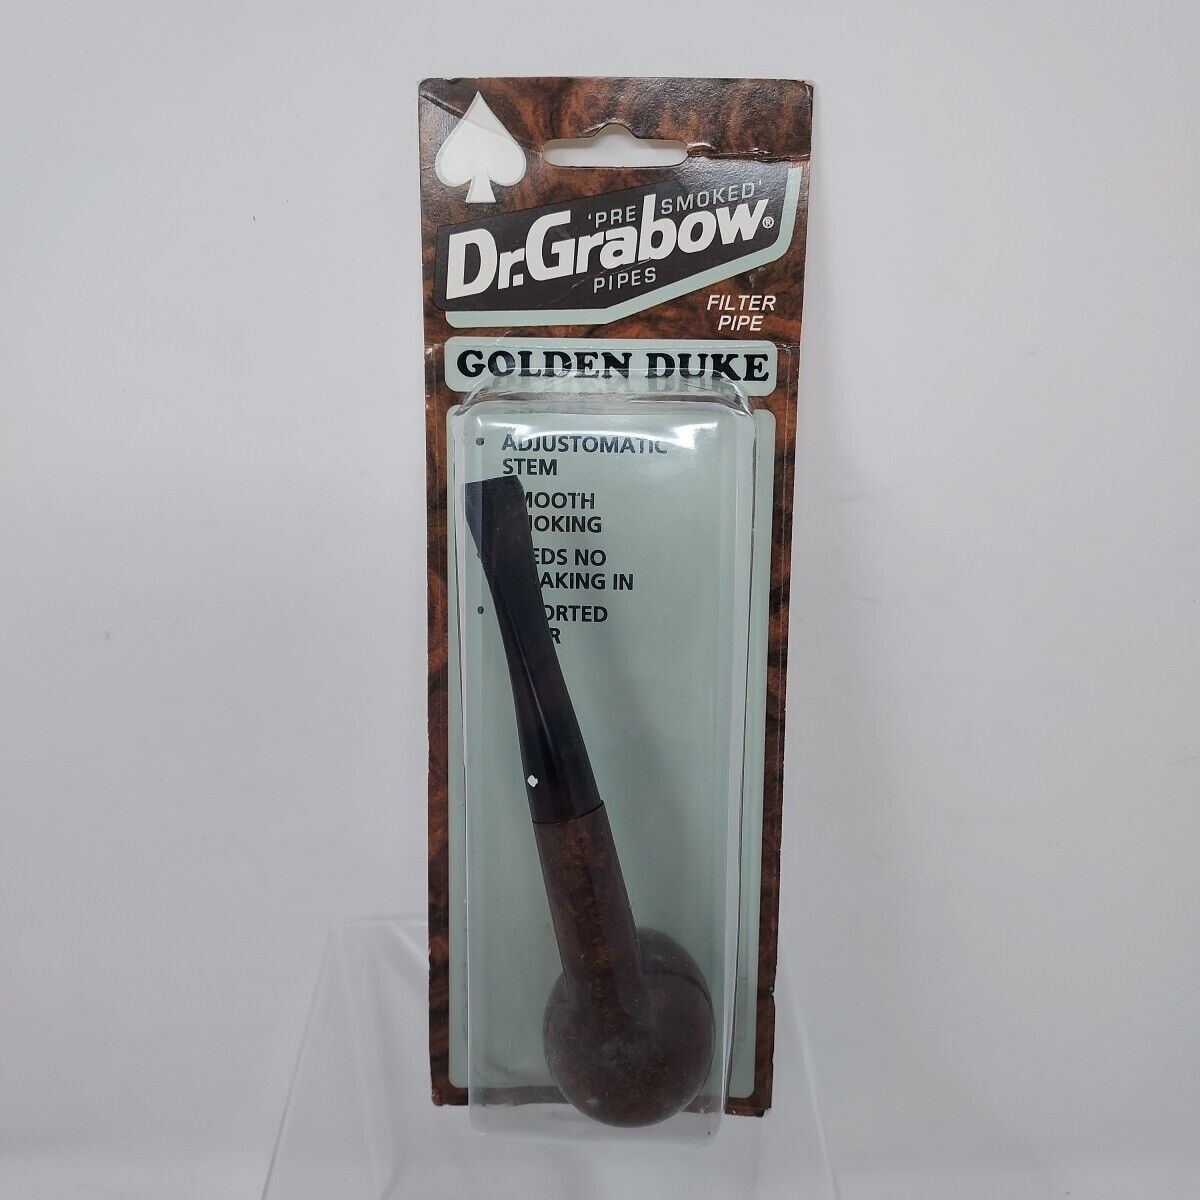 Vintage Dr Grabow Pre Smoked Golden Duke Smooth Tobacco Filter Pipe NIB 